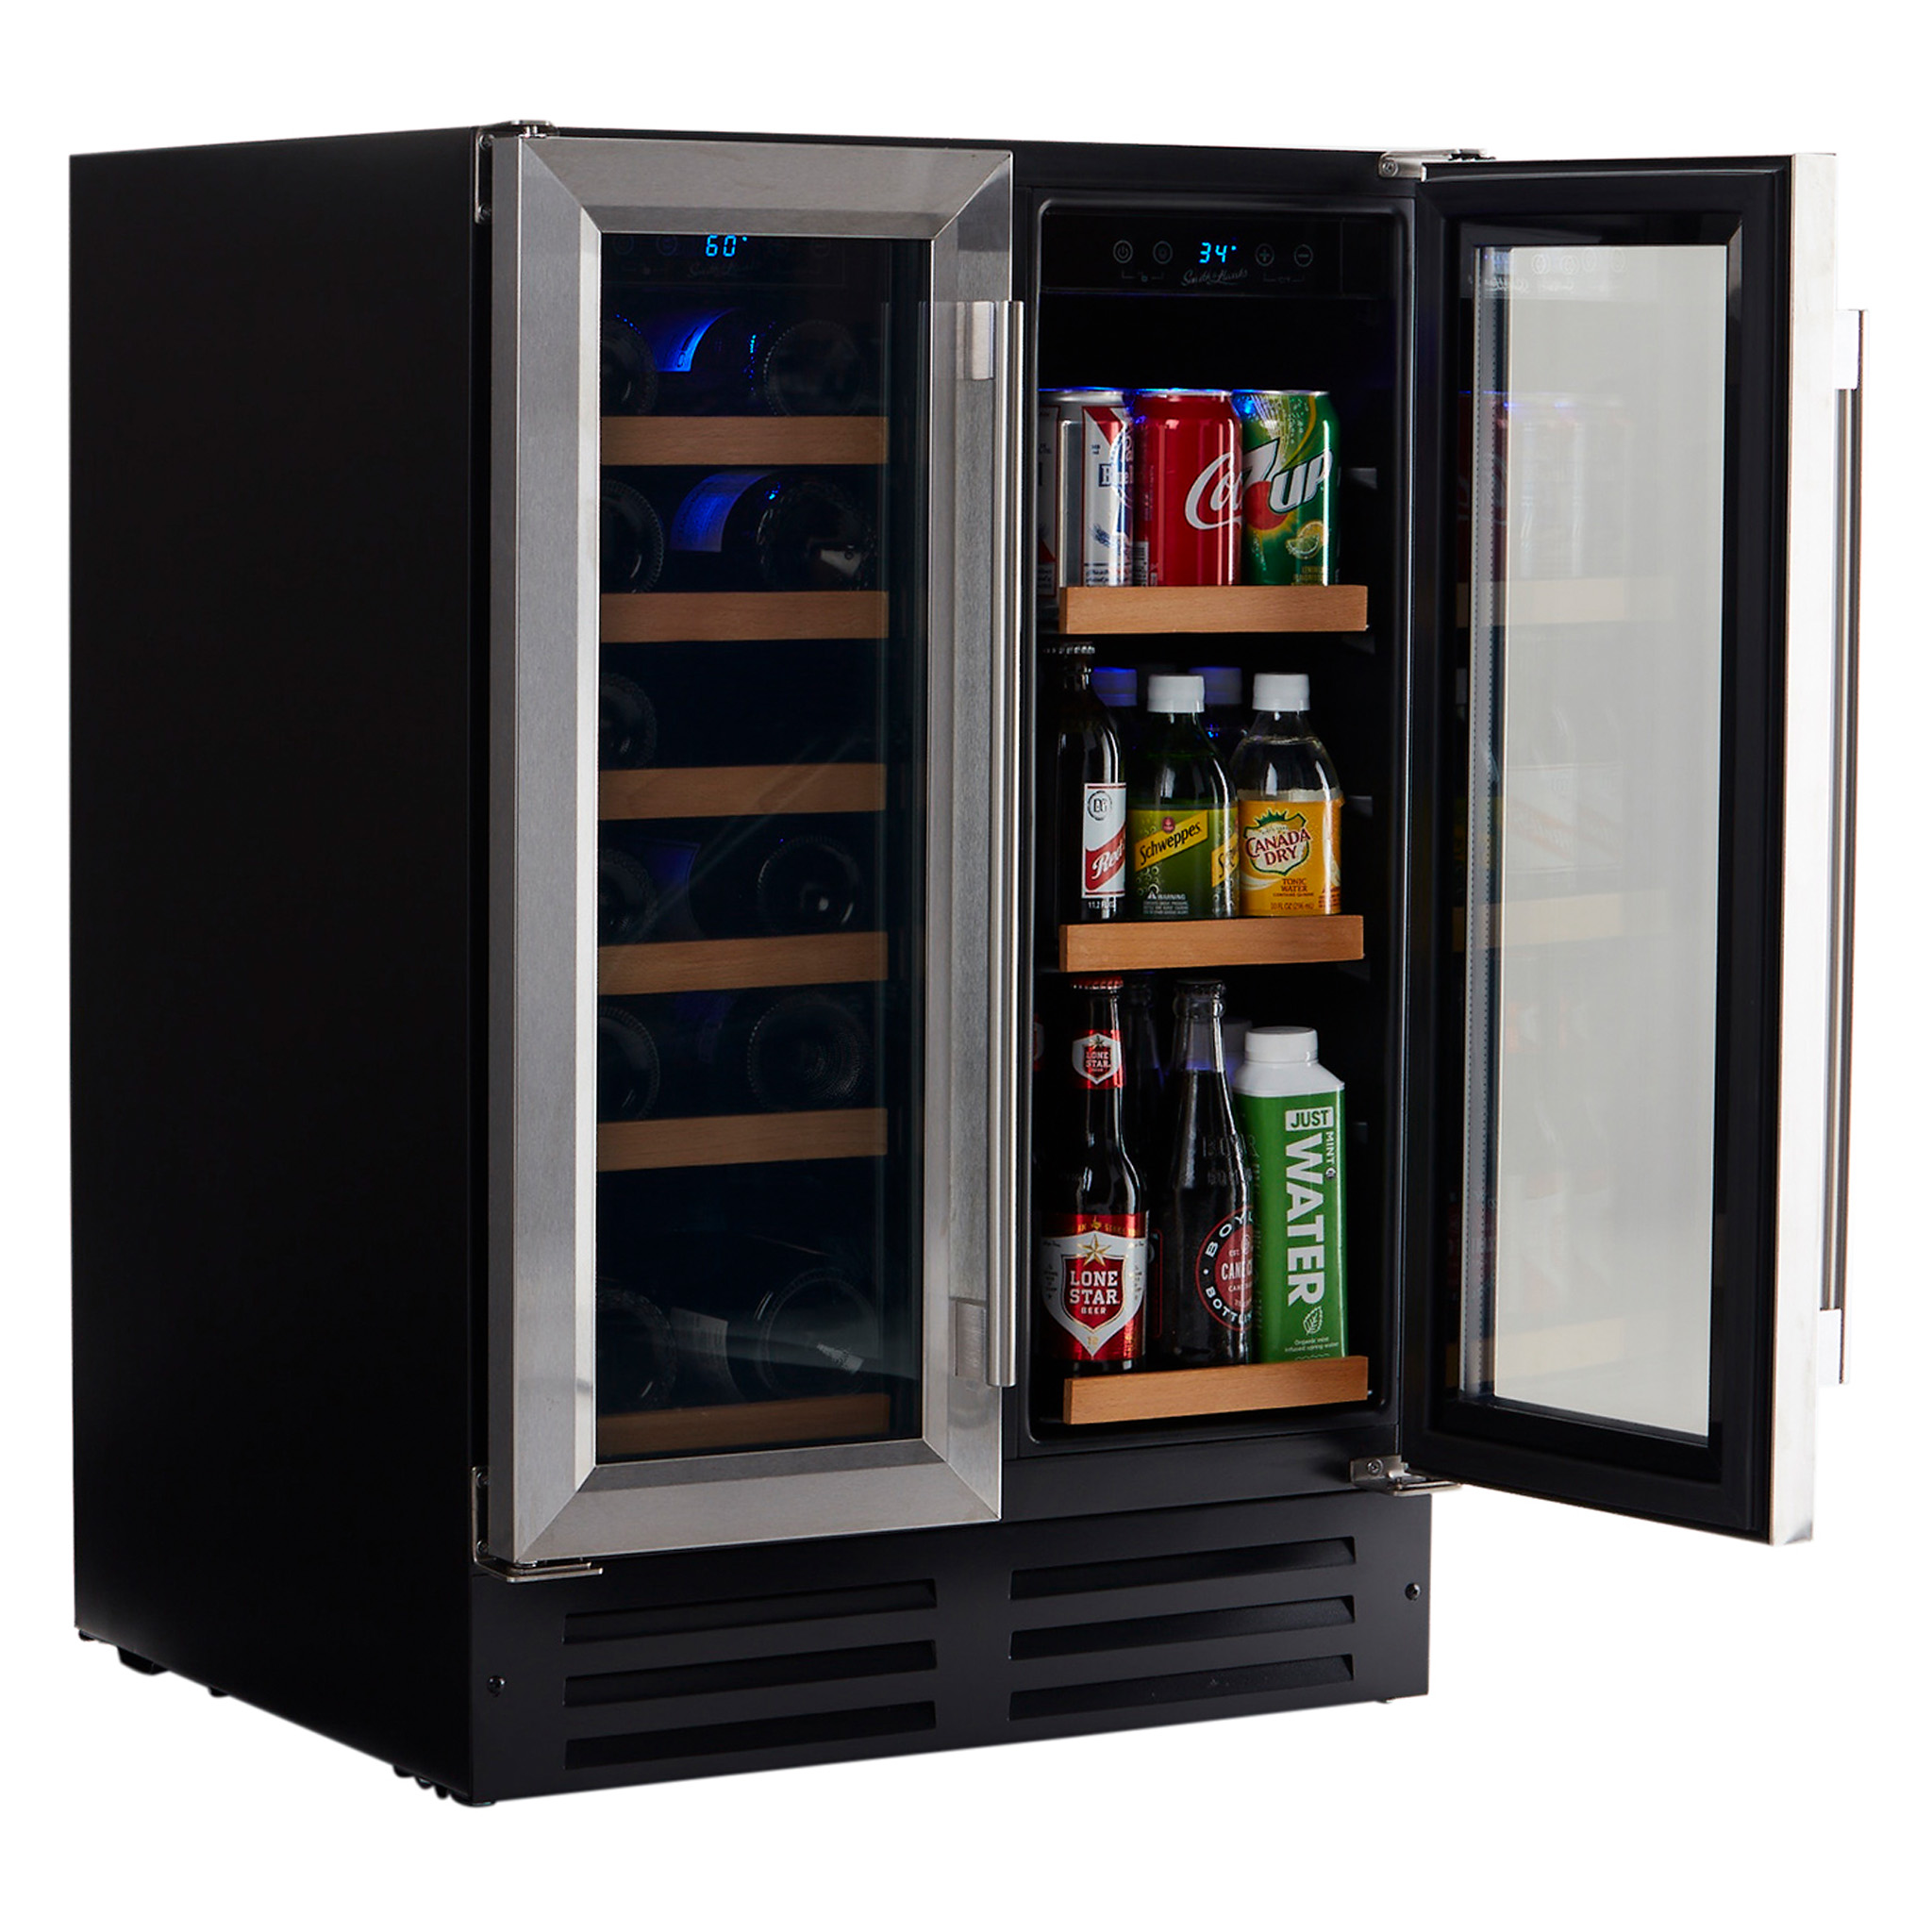 Enhance Your Beverage Experience with Our Wine and Beverage Coolers